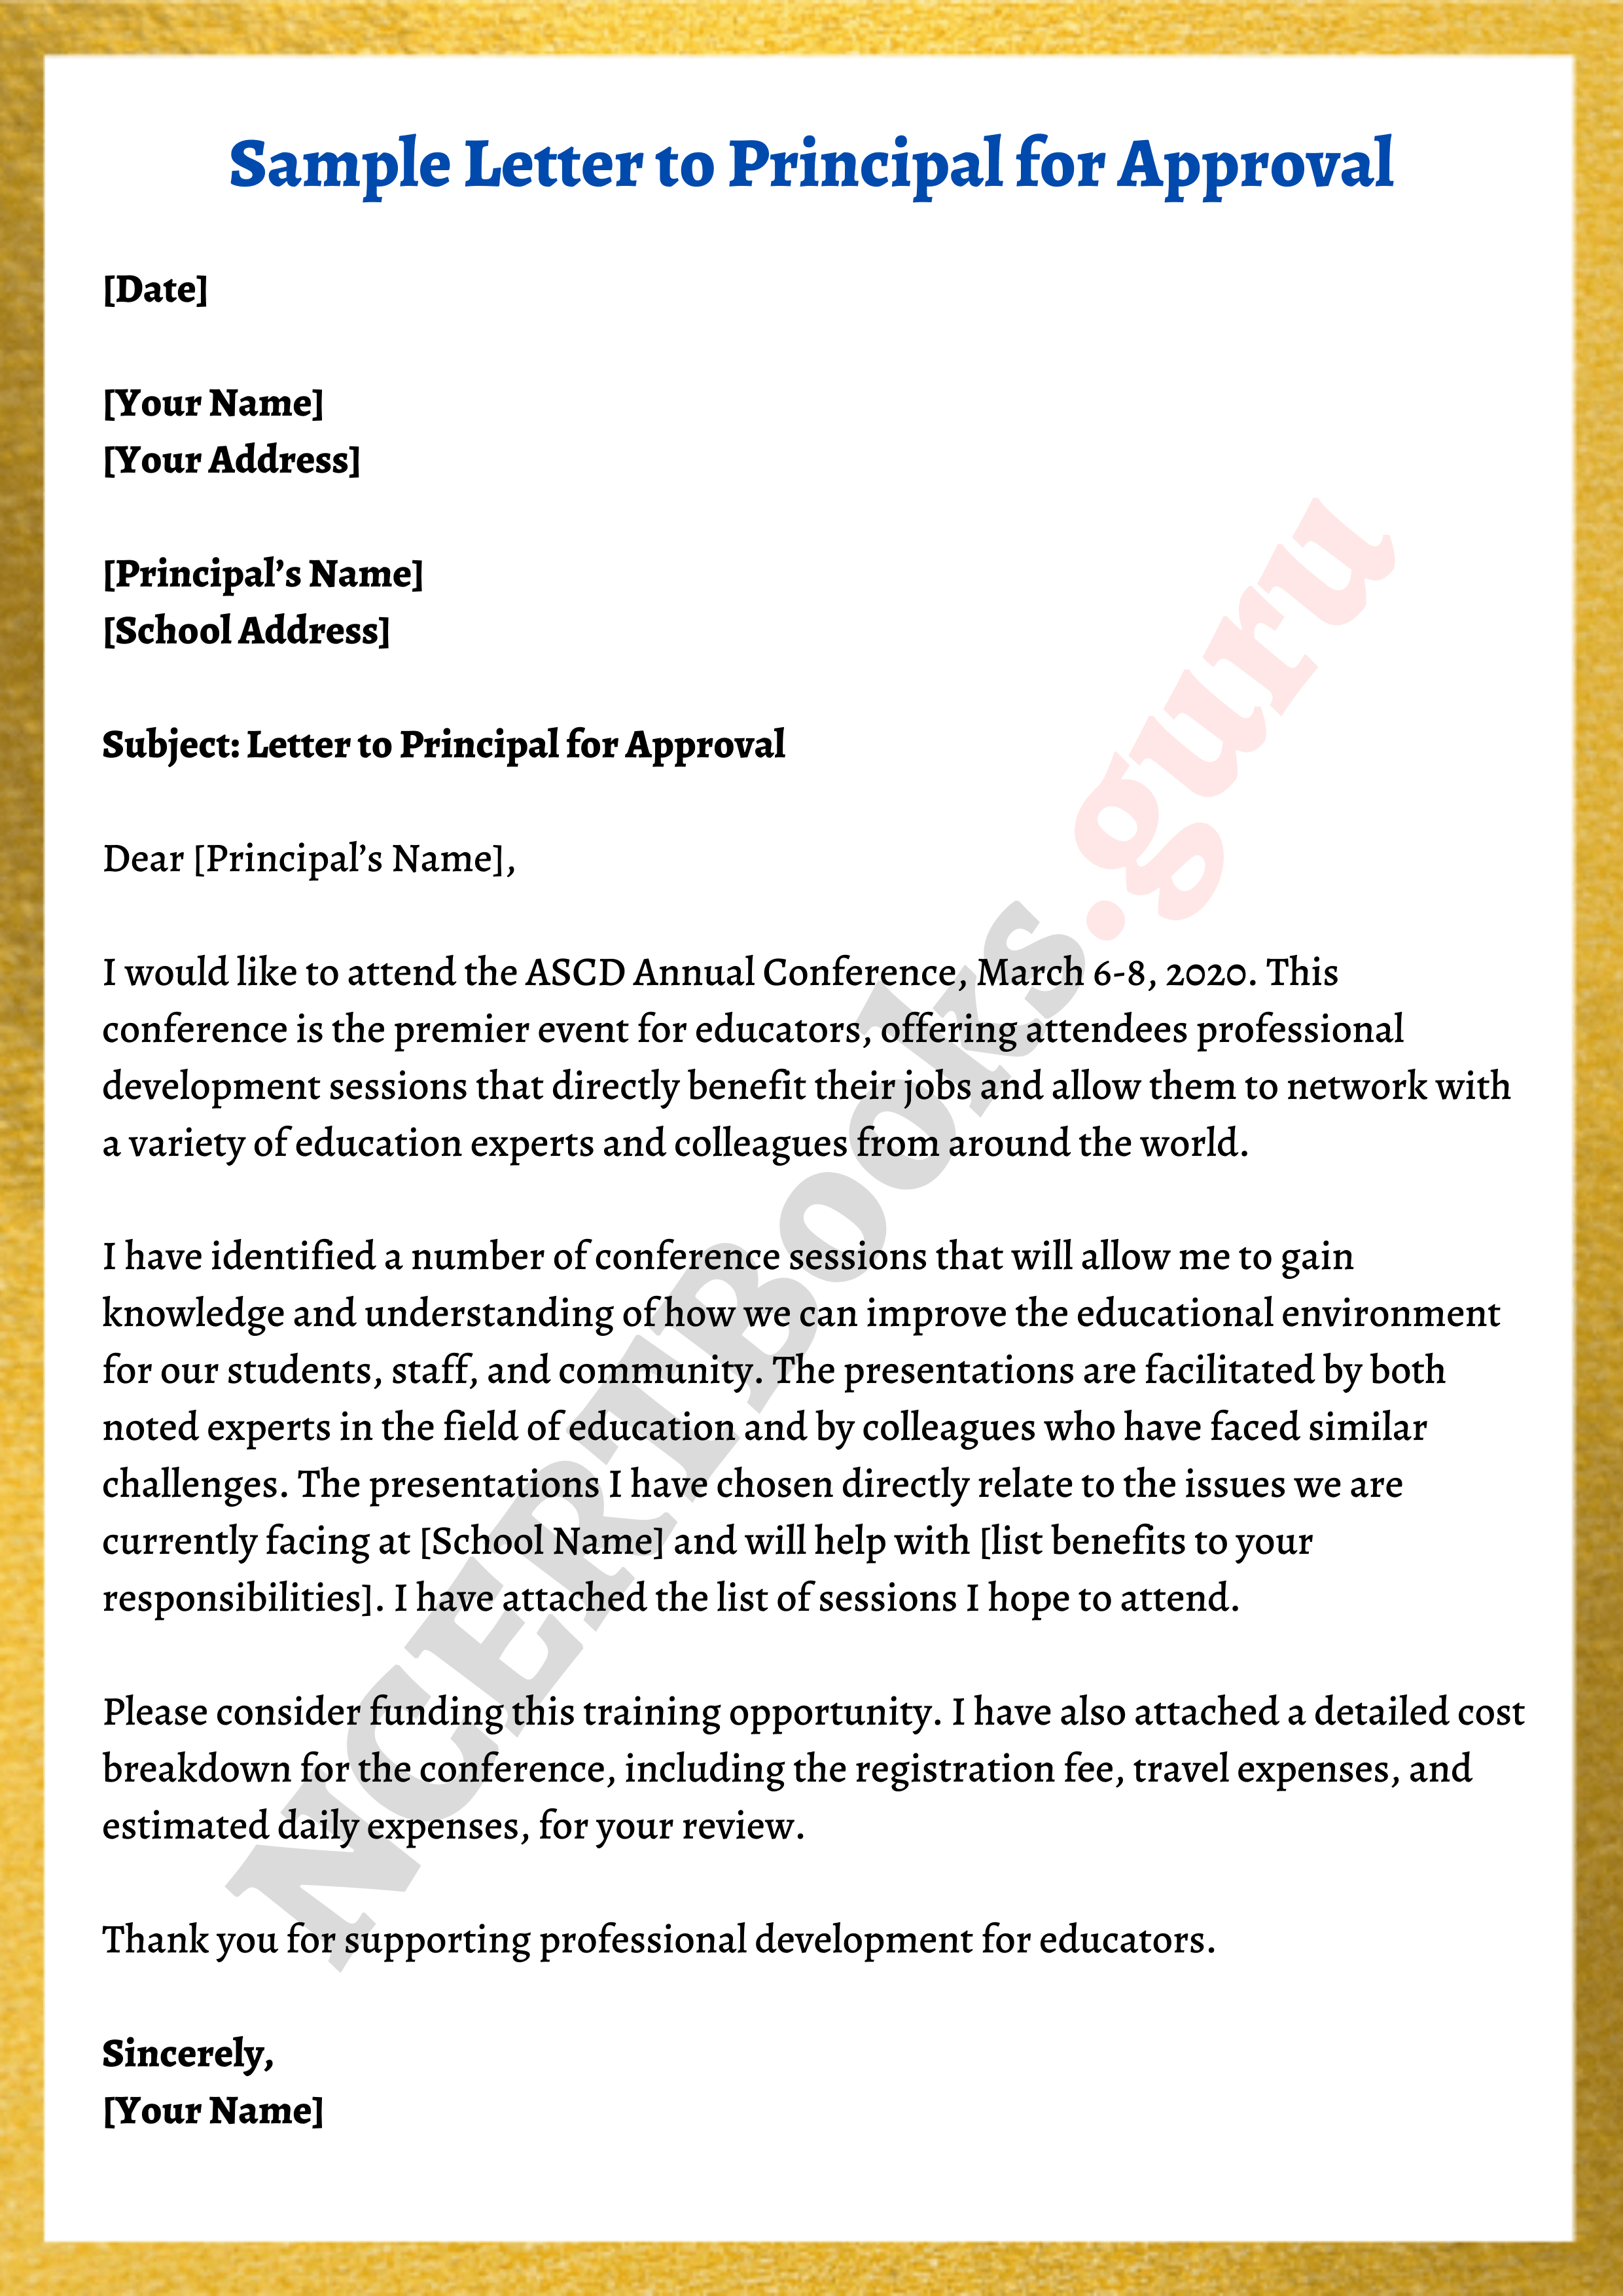 sample approval letter to principal